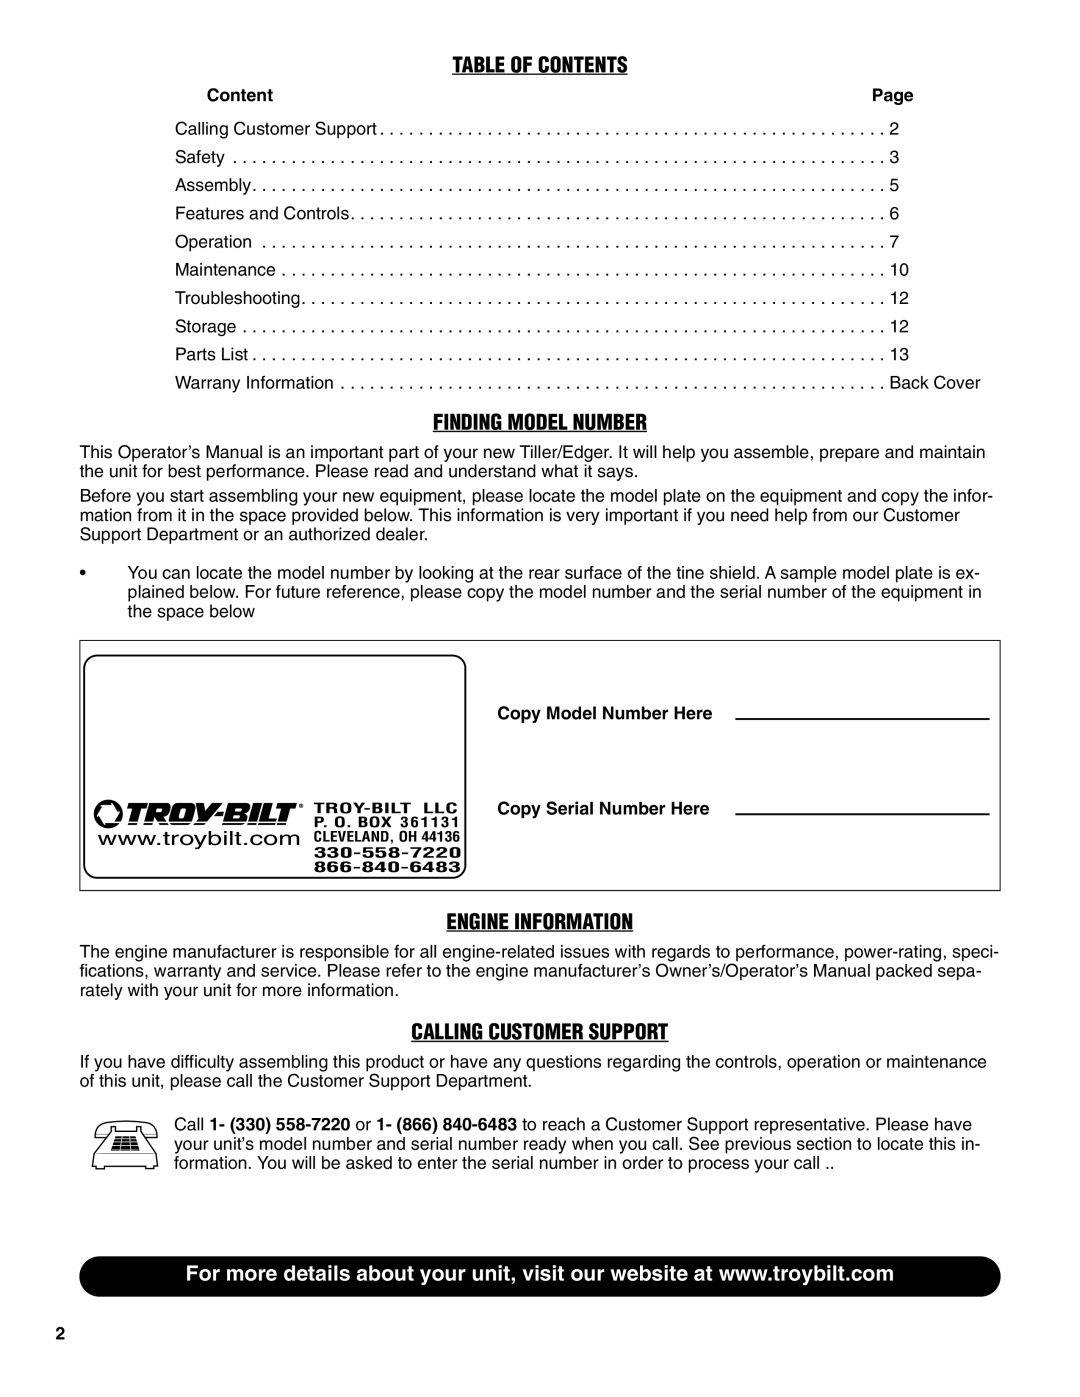 Troy-Bilt 148H manual Table Of Contents, Finding Model Number, Engine Information, Calling Customer Support 